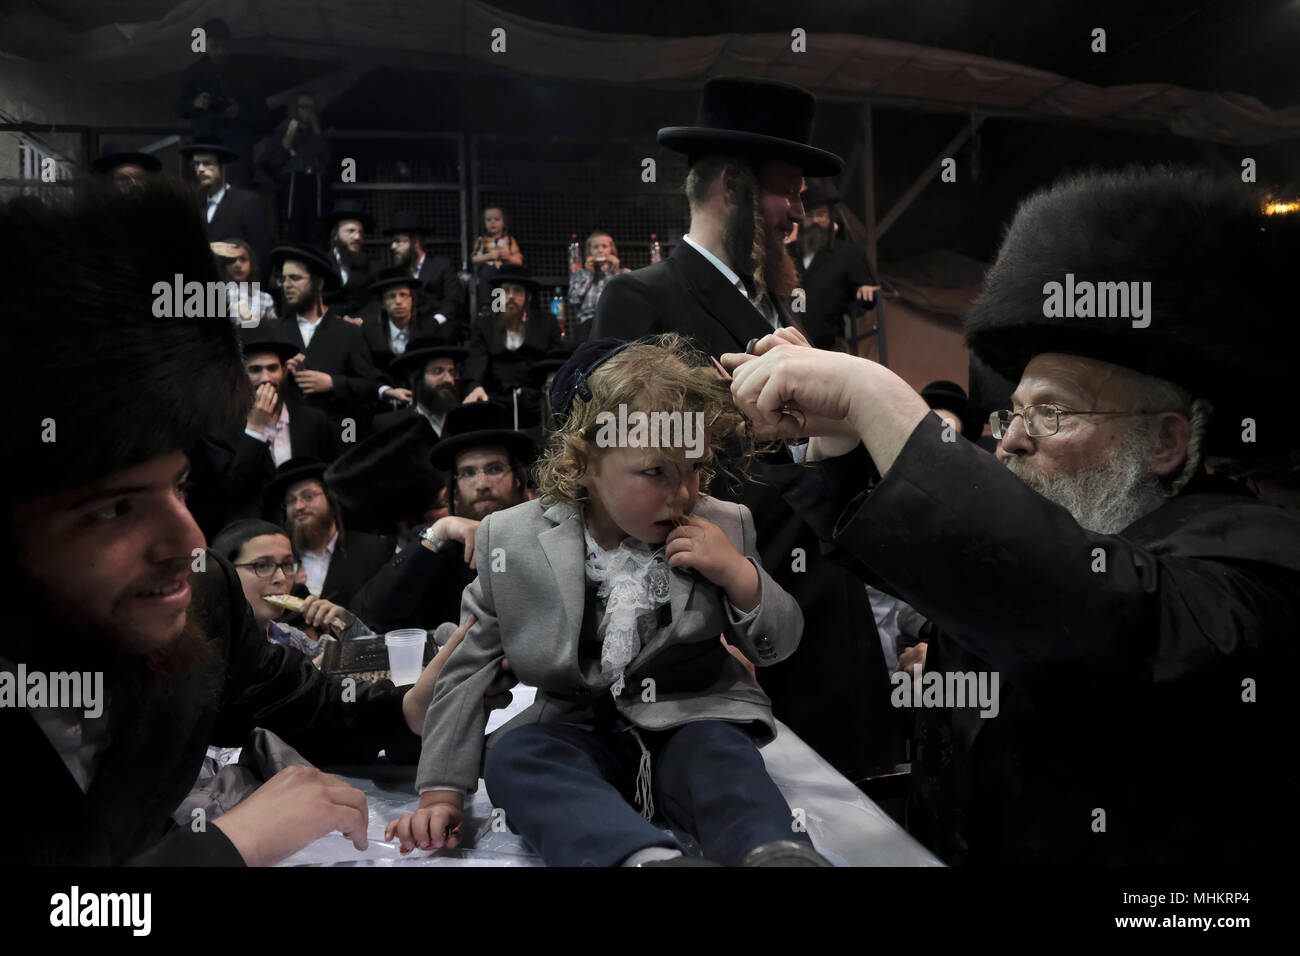 Jerusalem, Israel 02 May 2018. A three-year old Jewish boy takes part in the traditional Halake ceremony, a first hair cut from the Rabbi of the Pinsk-Karlin Hassidic dynasty in Geula religious neighborhood during the celebration of Lag BaOmer holiday which marks the celebration, interpreted by some as anniversary of death of Rabbi Shimon bar Yochai, one of Judaism's great sages some 1800 years ago and the day on which he revealed the deepest secrets of kabbalah a landmark text of Jewish mysticism Credit: Eddie Gerald/Alamy Live News Stock Photo